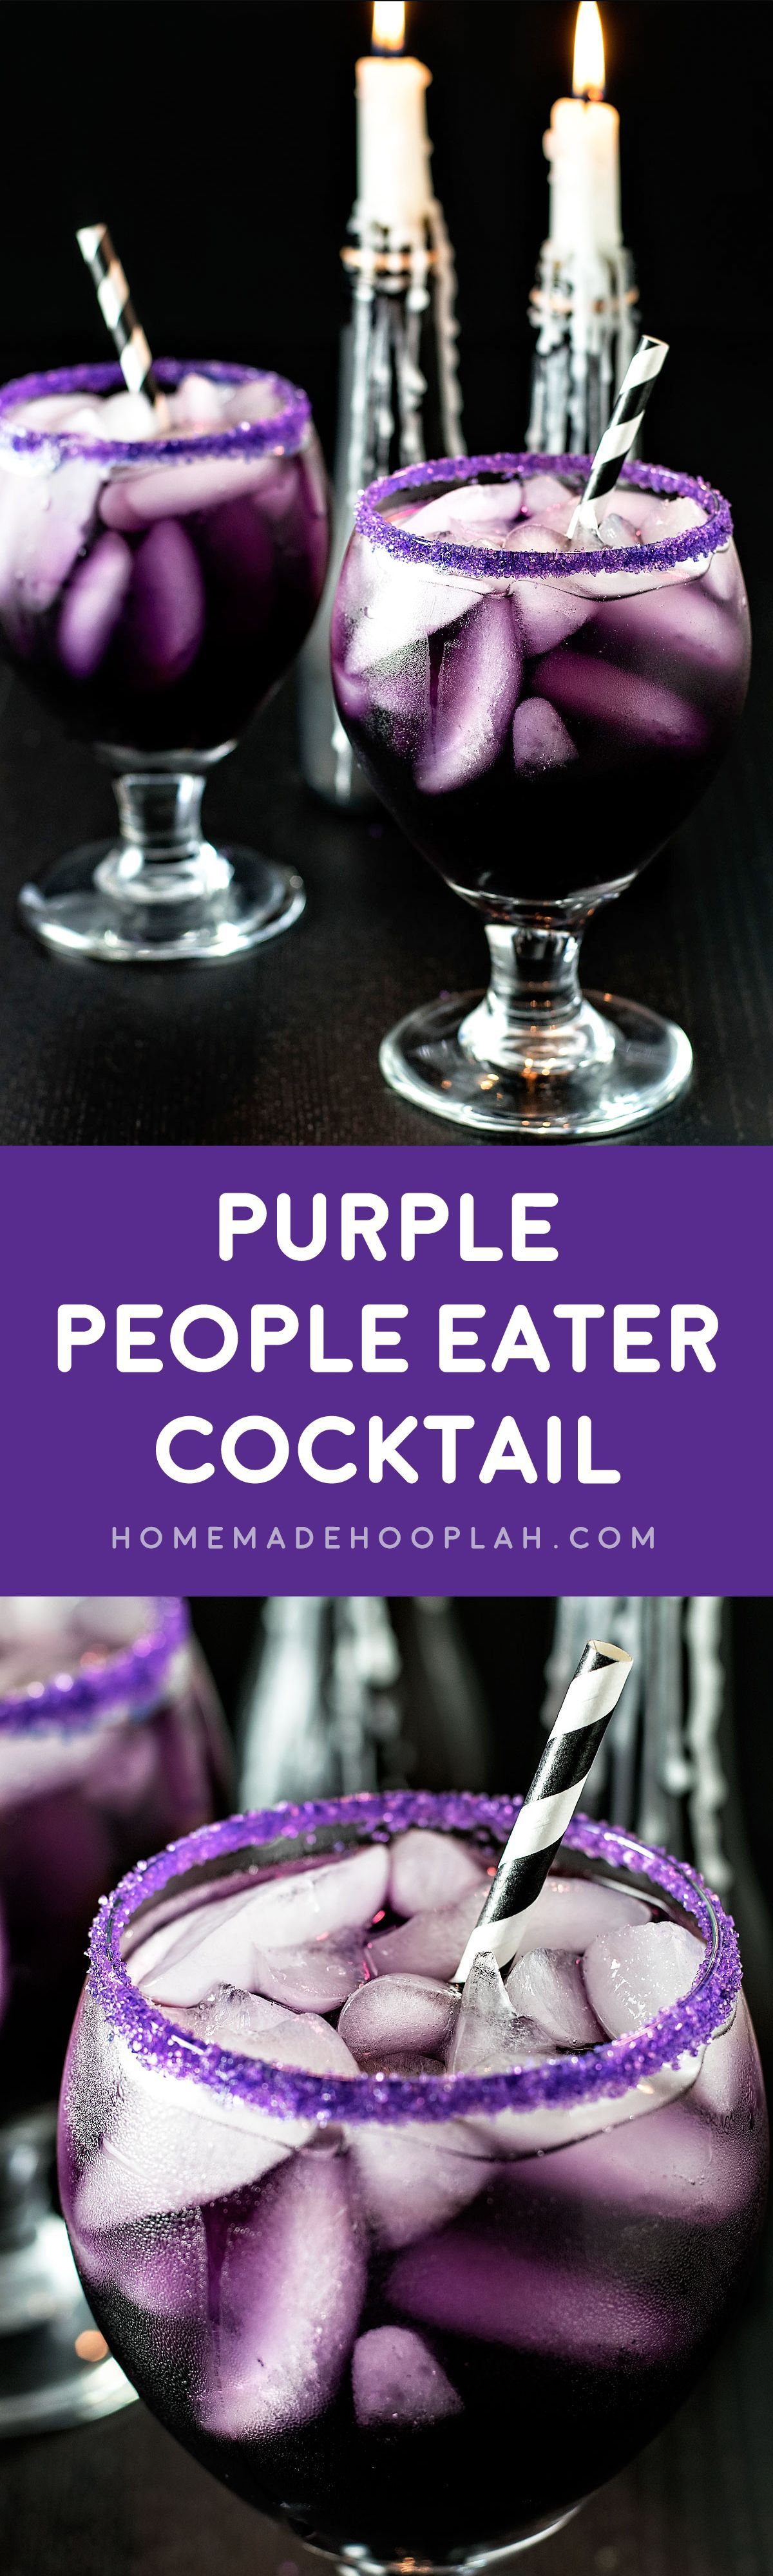 Purple People Eater Cocktail! A tasty cocktail that gets its purple hue from blue curacao, g